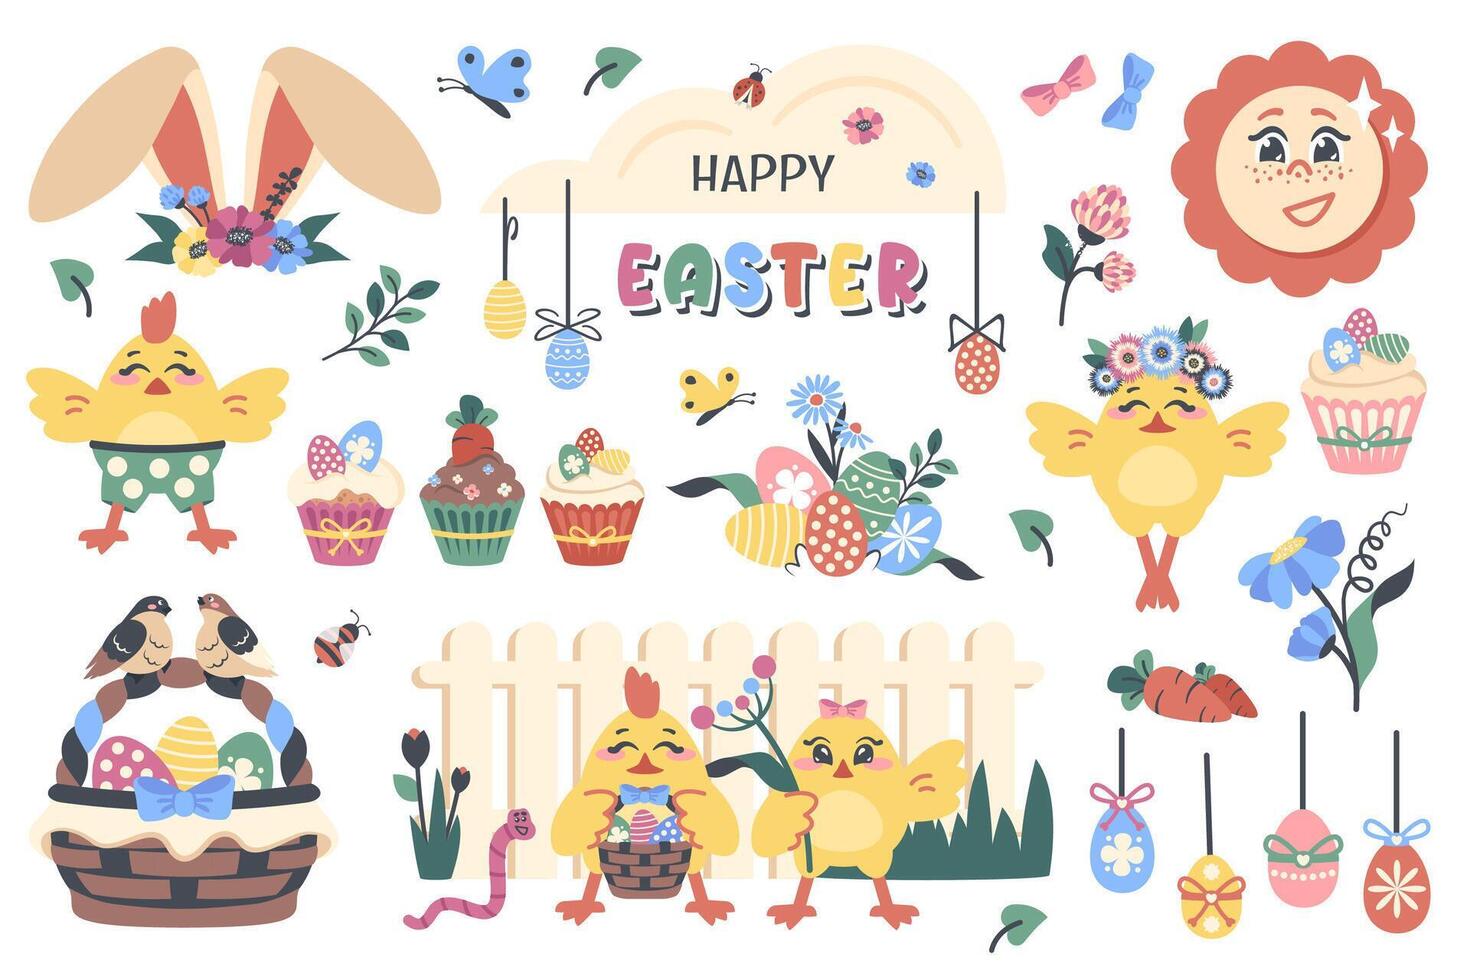 Set of easter elements isolated. Easter egg, bunny ears, chicks, birds on basket, fence, carrot, cake. Hand draw doodle elements for decorated greeting card, poster, party. Vector Cartoon illustration